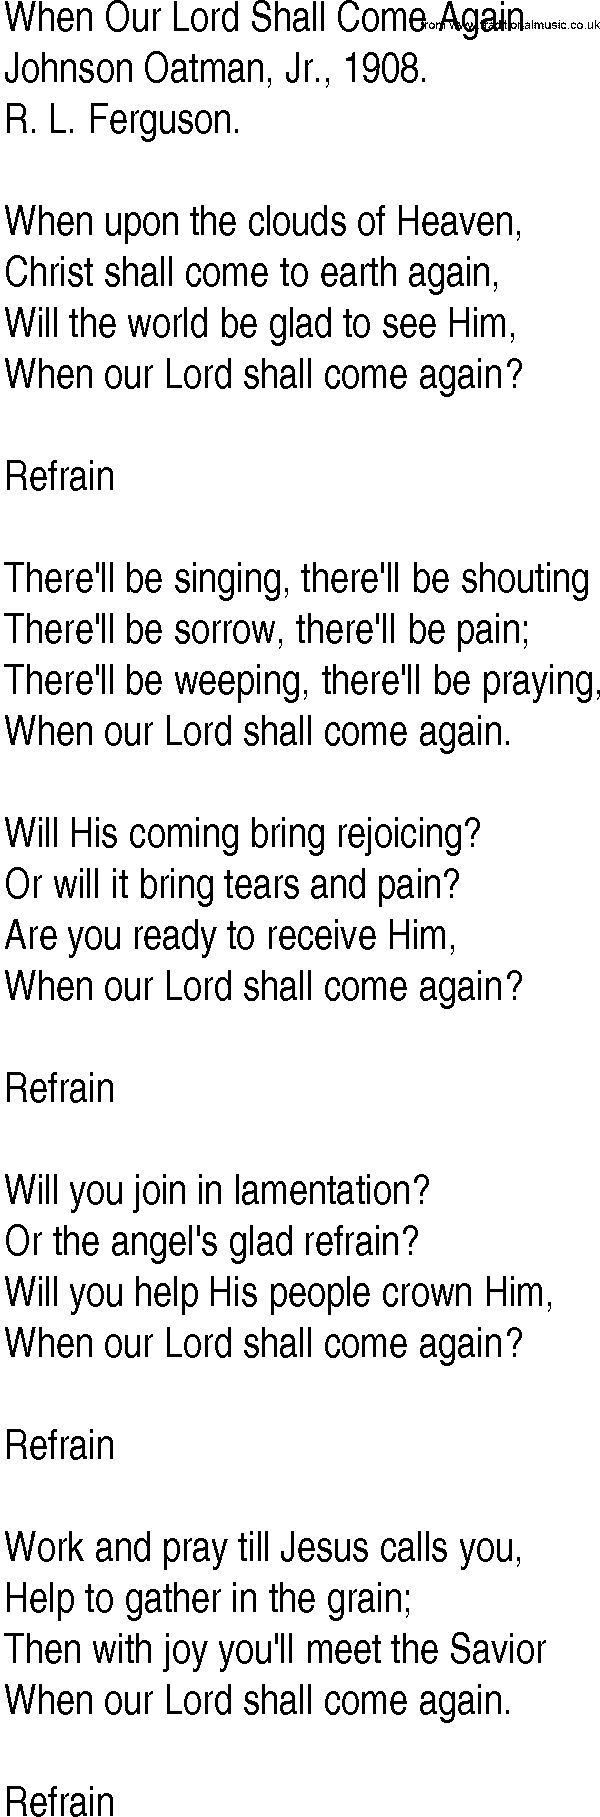 Hymn and Gospel Song: When Our Lord Shall Come Again by Johnson Oatman Jr lyrics